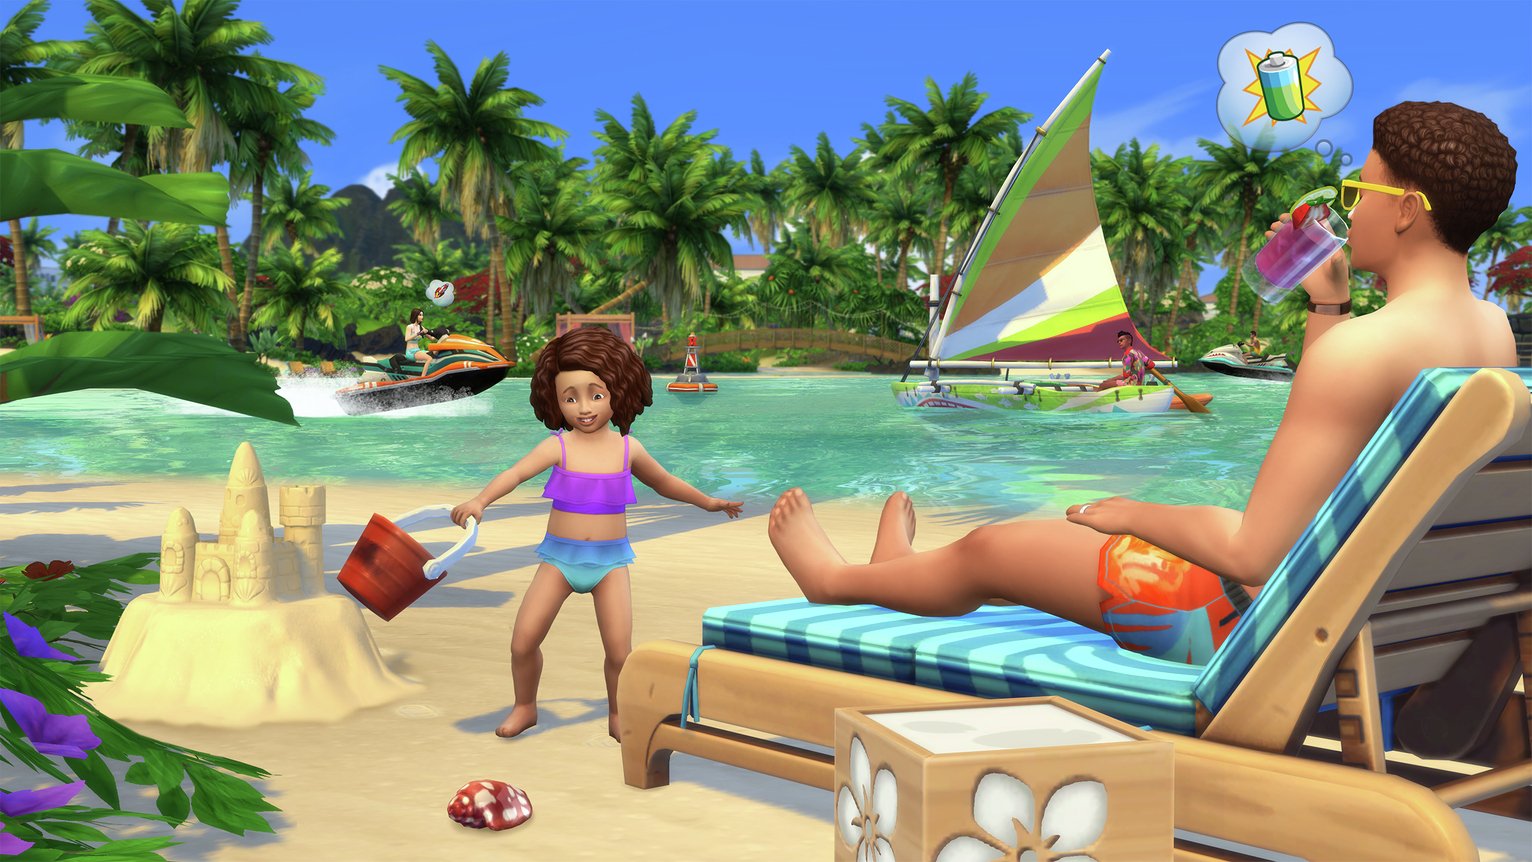 The Sims 4 & Island Living Expansion Pack PC Game Bundle Review